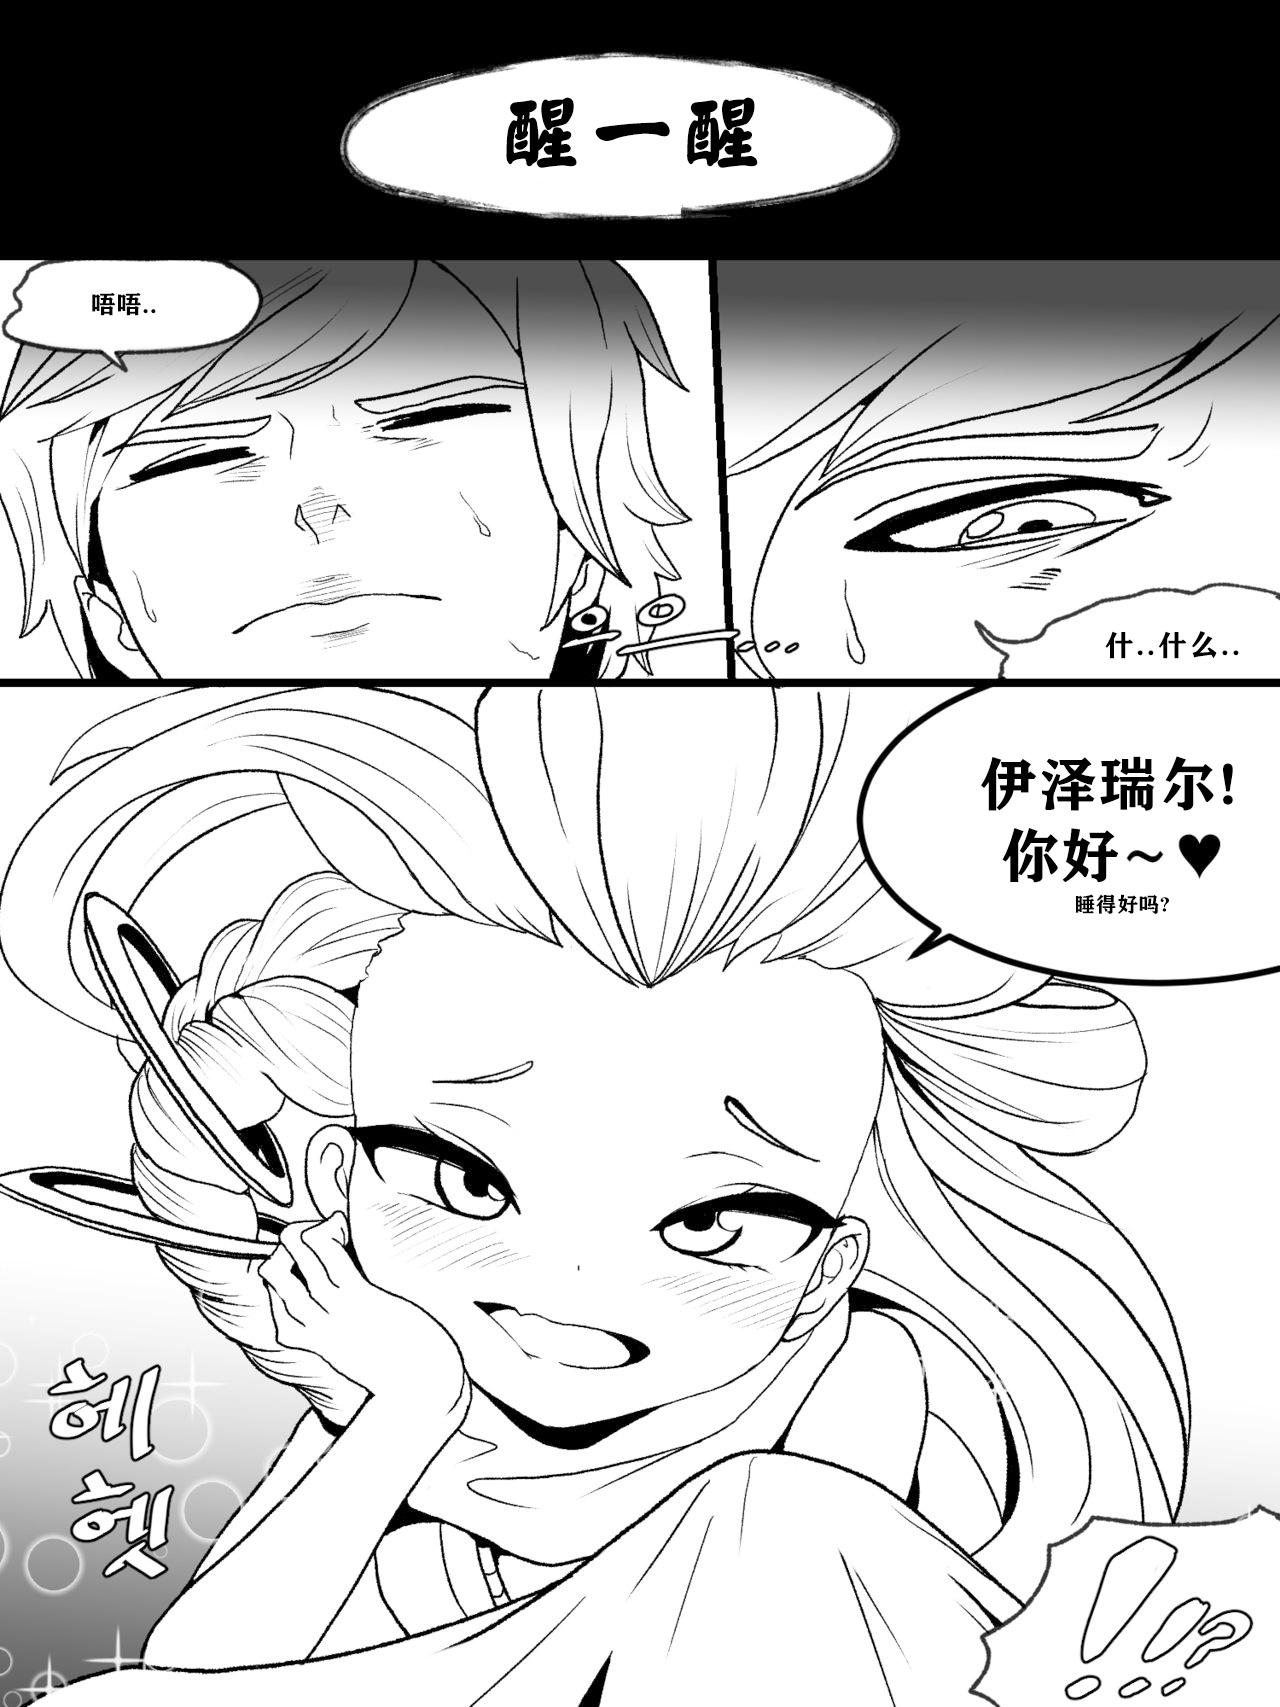 Facefuck The reality in the starlight | 星光中的真实 - League of legends Watersports - Page 4